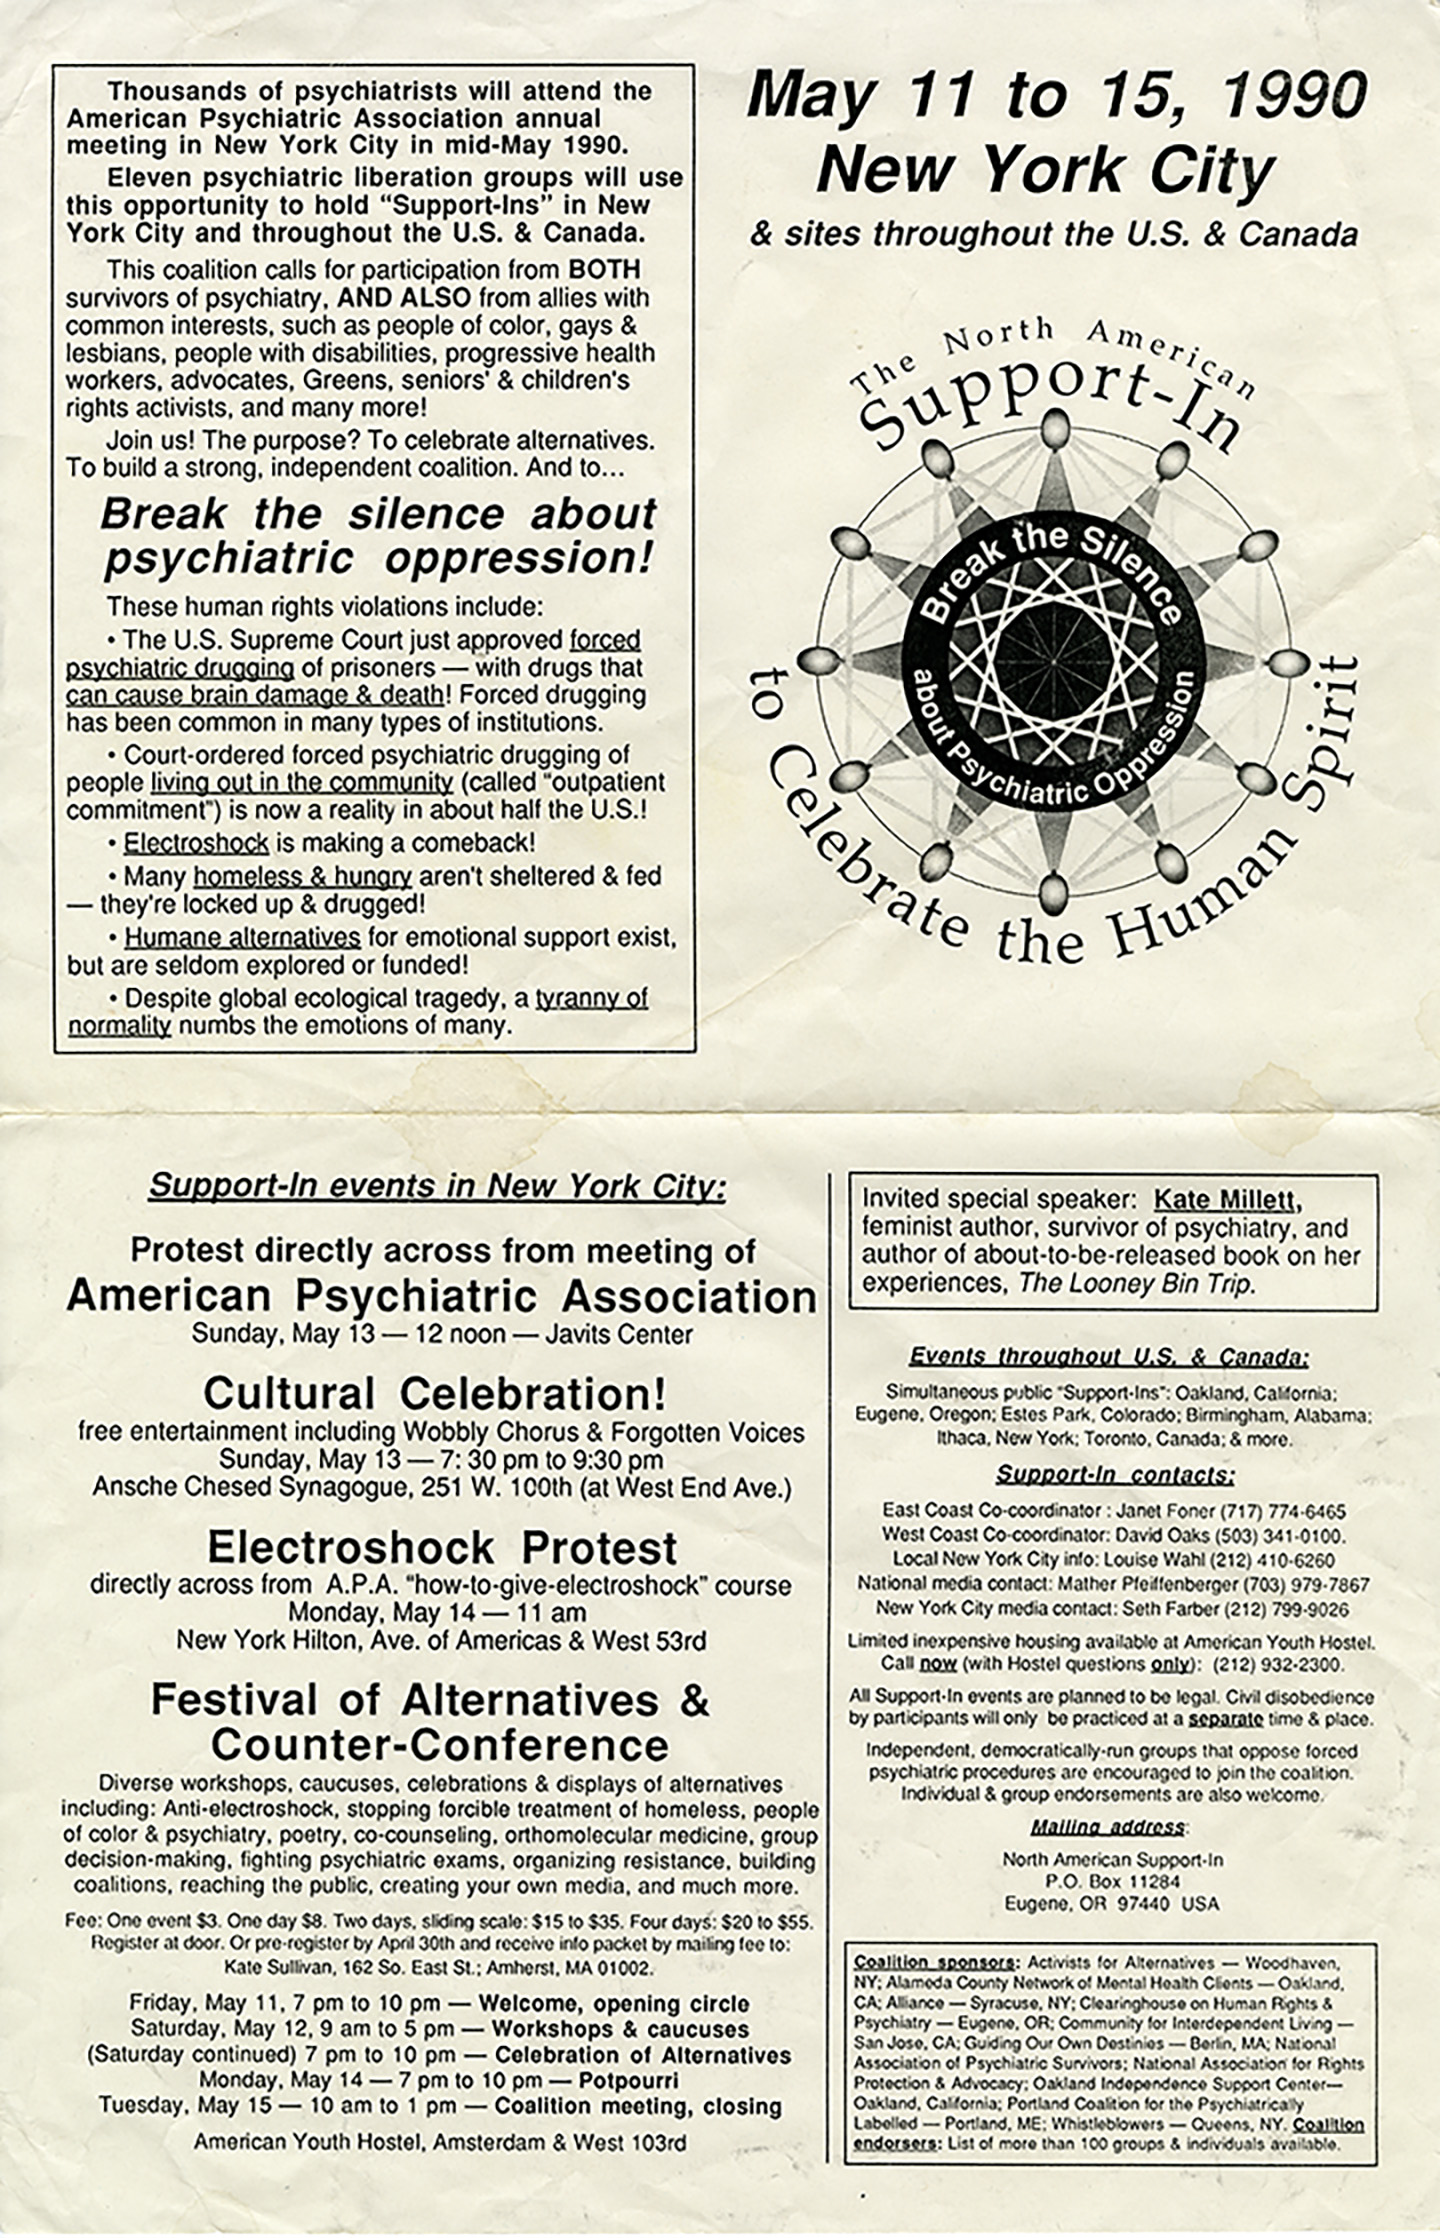 Poster for North American Support-In May 11 to 15, 1990 in NYC and sites around the U.S. and Canada. 